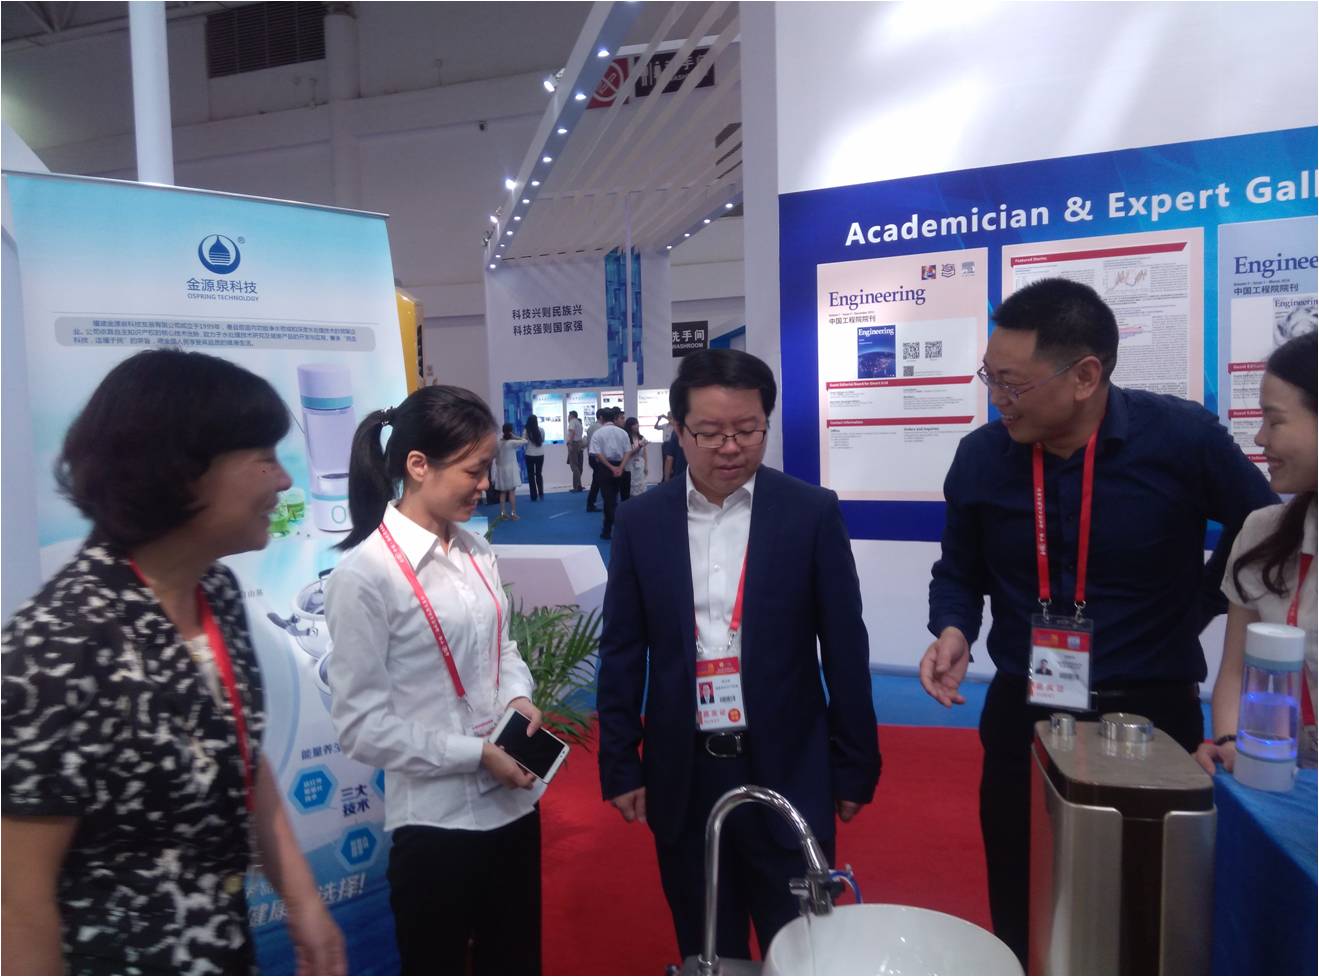 TECHNOLOGY LIGHT UP THE FUTURE - OSPRING IS PARTICIPATING IN THE 14TH CROSS-STRAIT FAIR FOR ECONOMY AND TRADE (CFET)